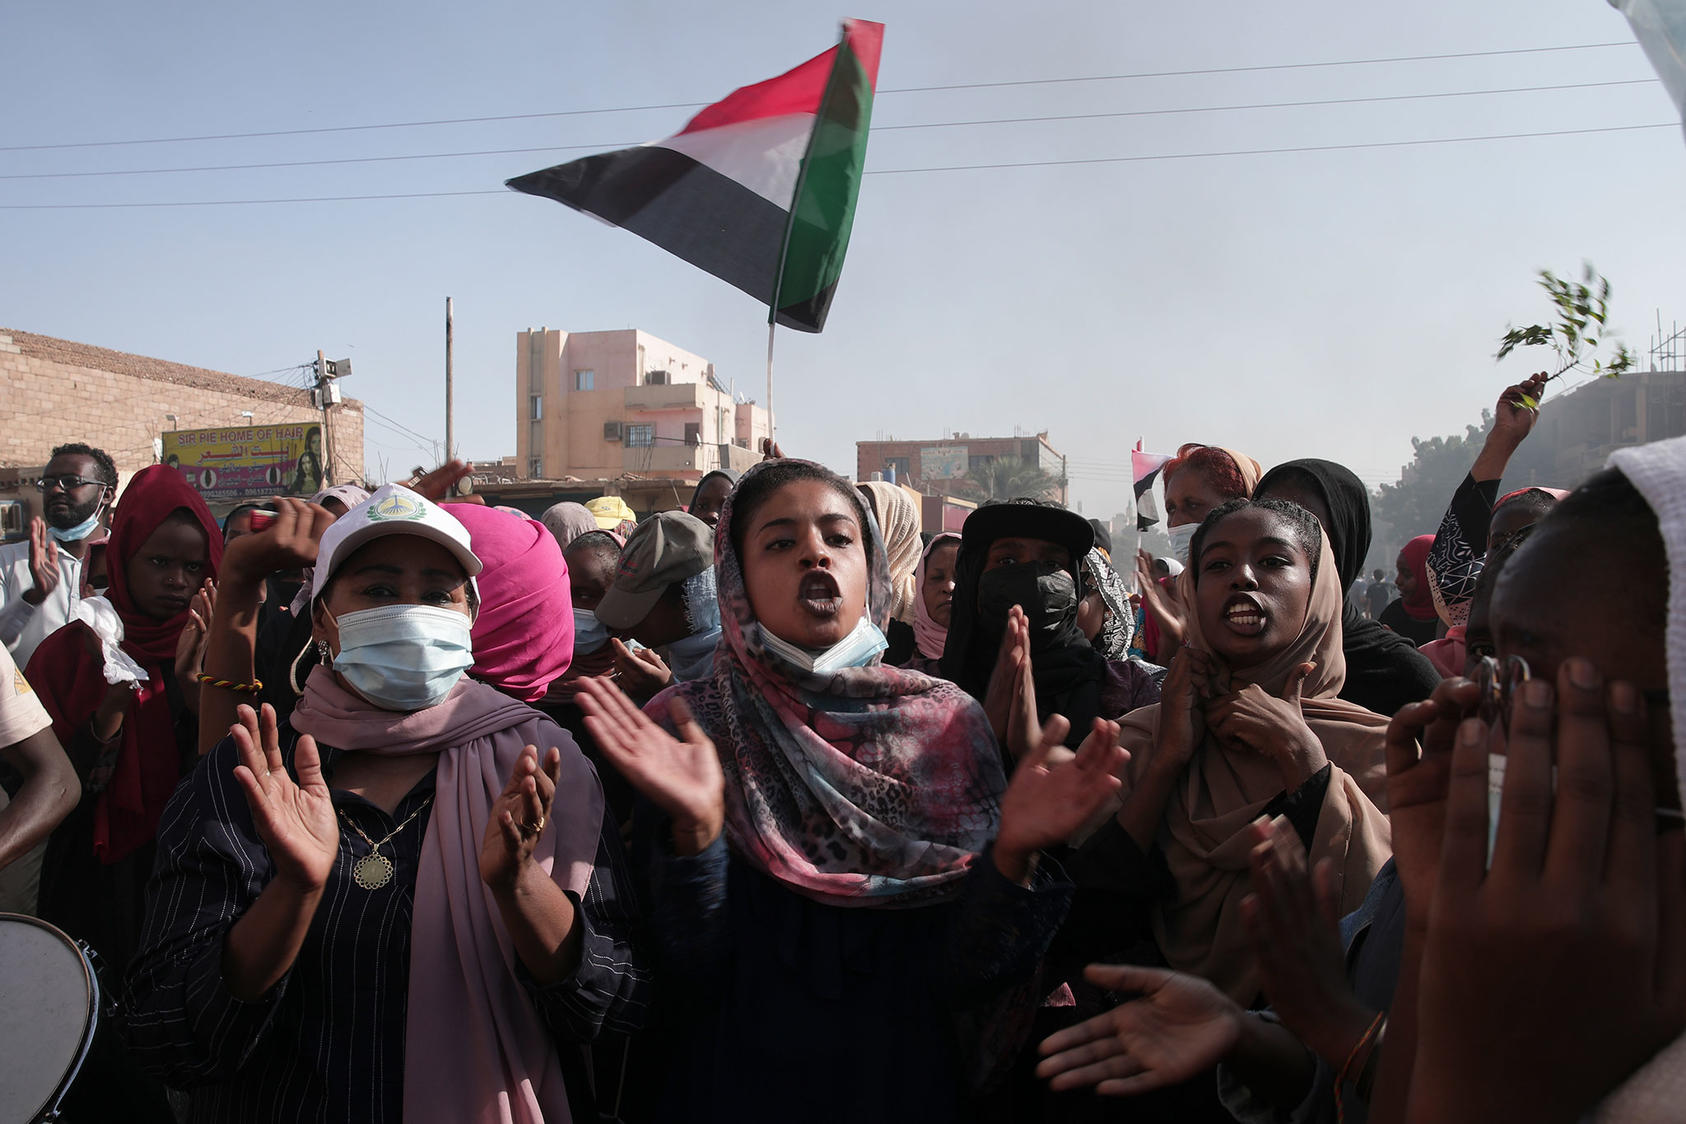 On November 17, 2021, in Khartoum, Sudan, protesters demonstrate against the military coup that ousted the government in October. (Photo by Marwan Ali/AP)